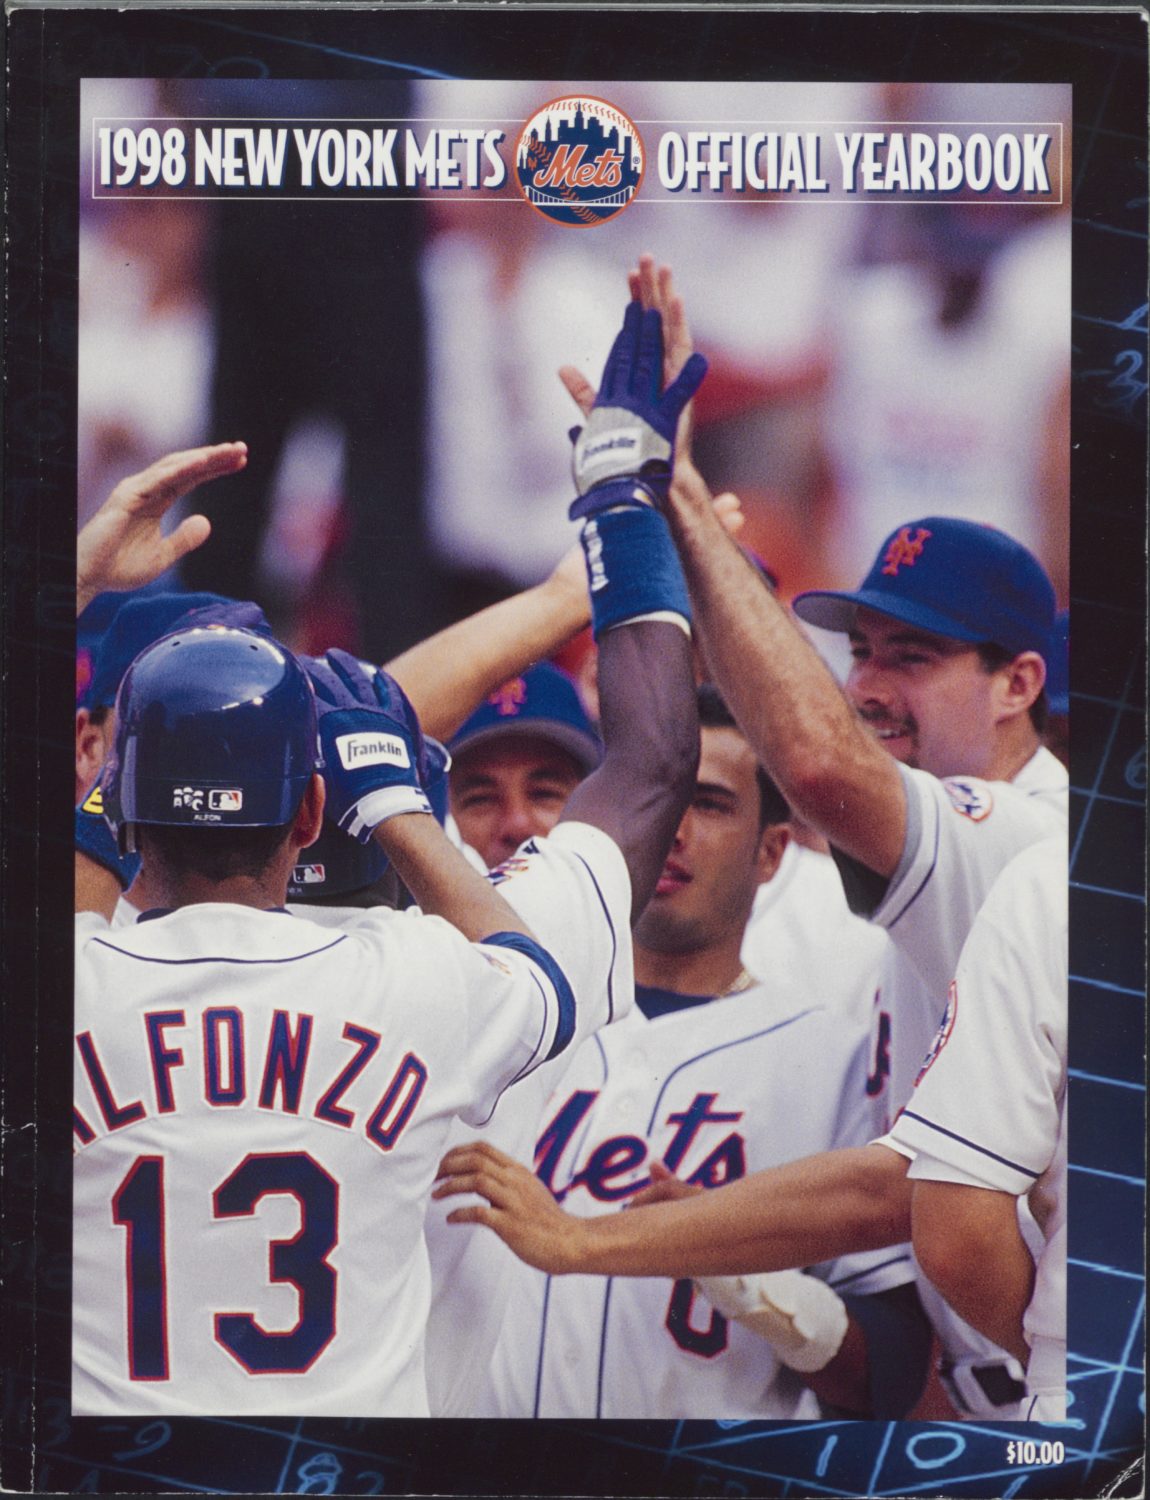 1998 Mets Yearbook With Mets Players Celebrating on Cover